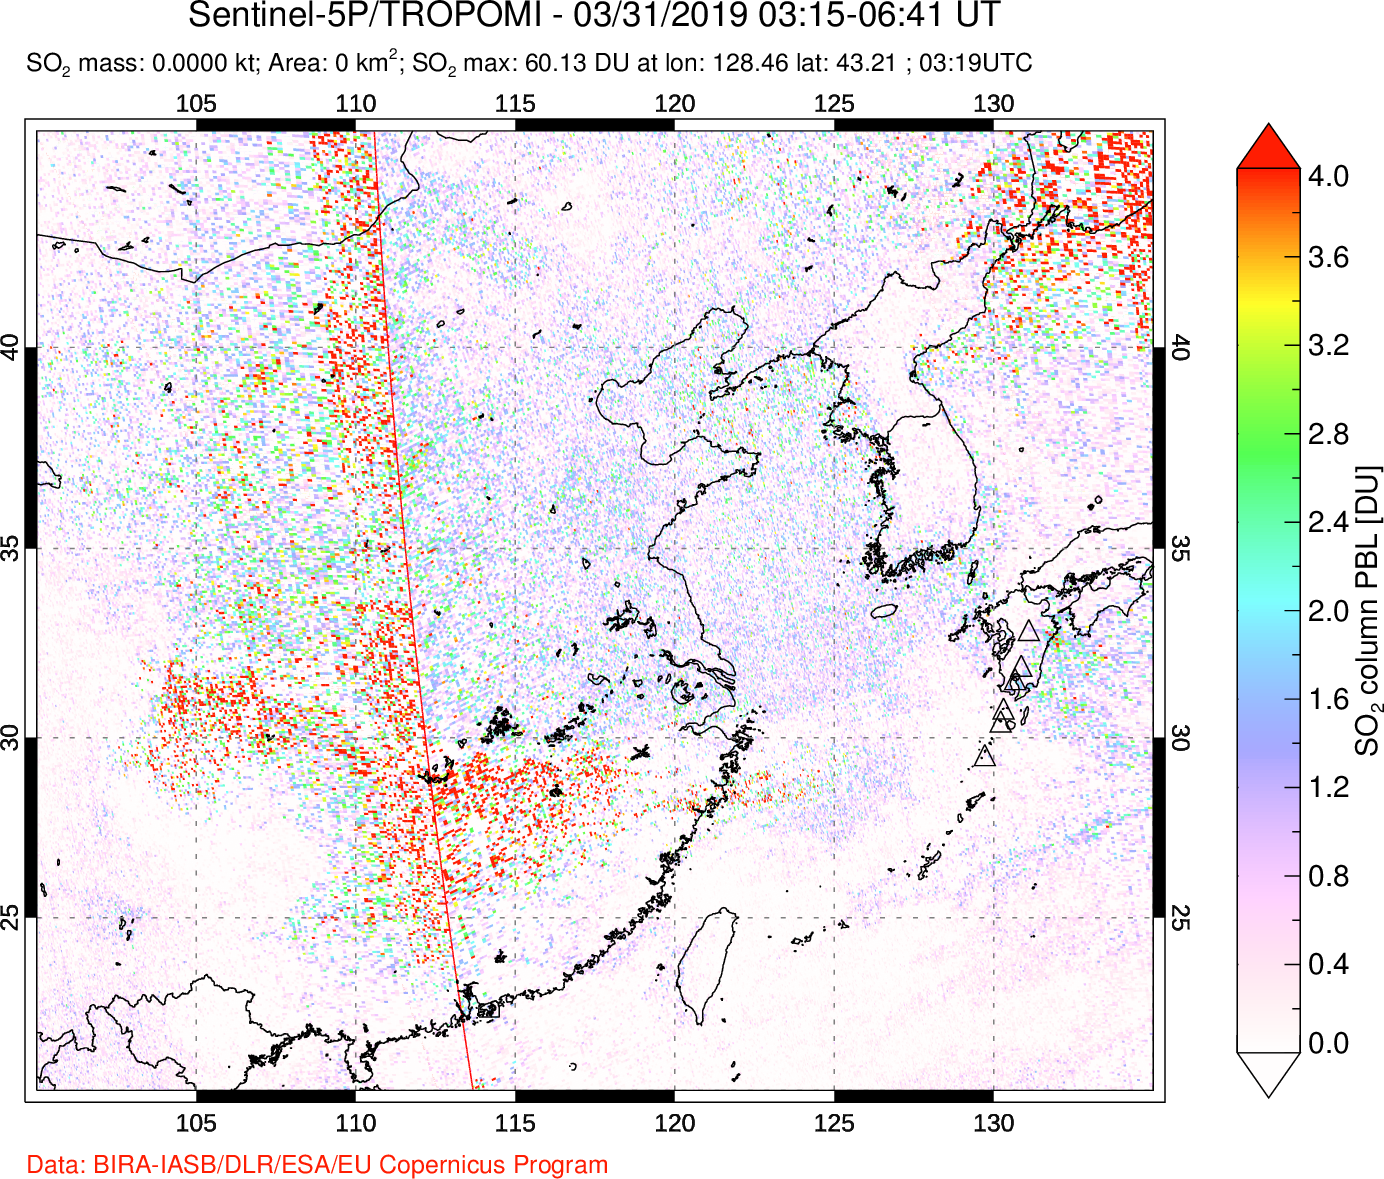 A sulfur dioxide image over Eastern China on Mar 31, 2019.